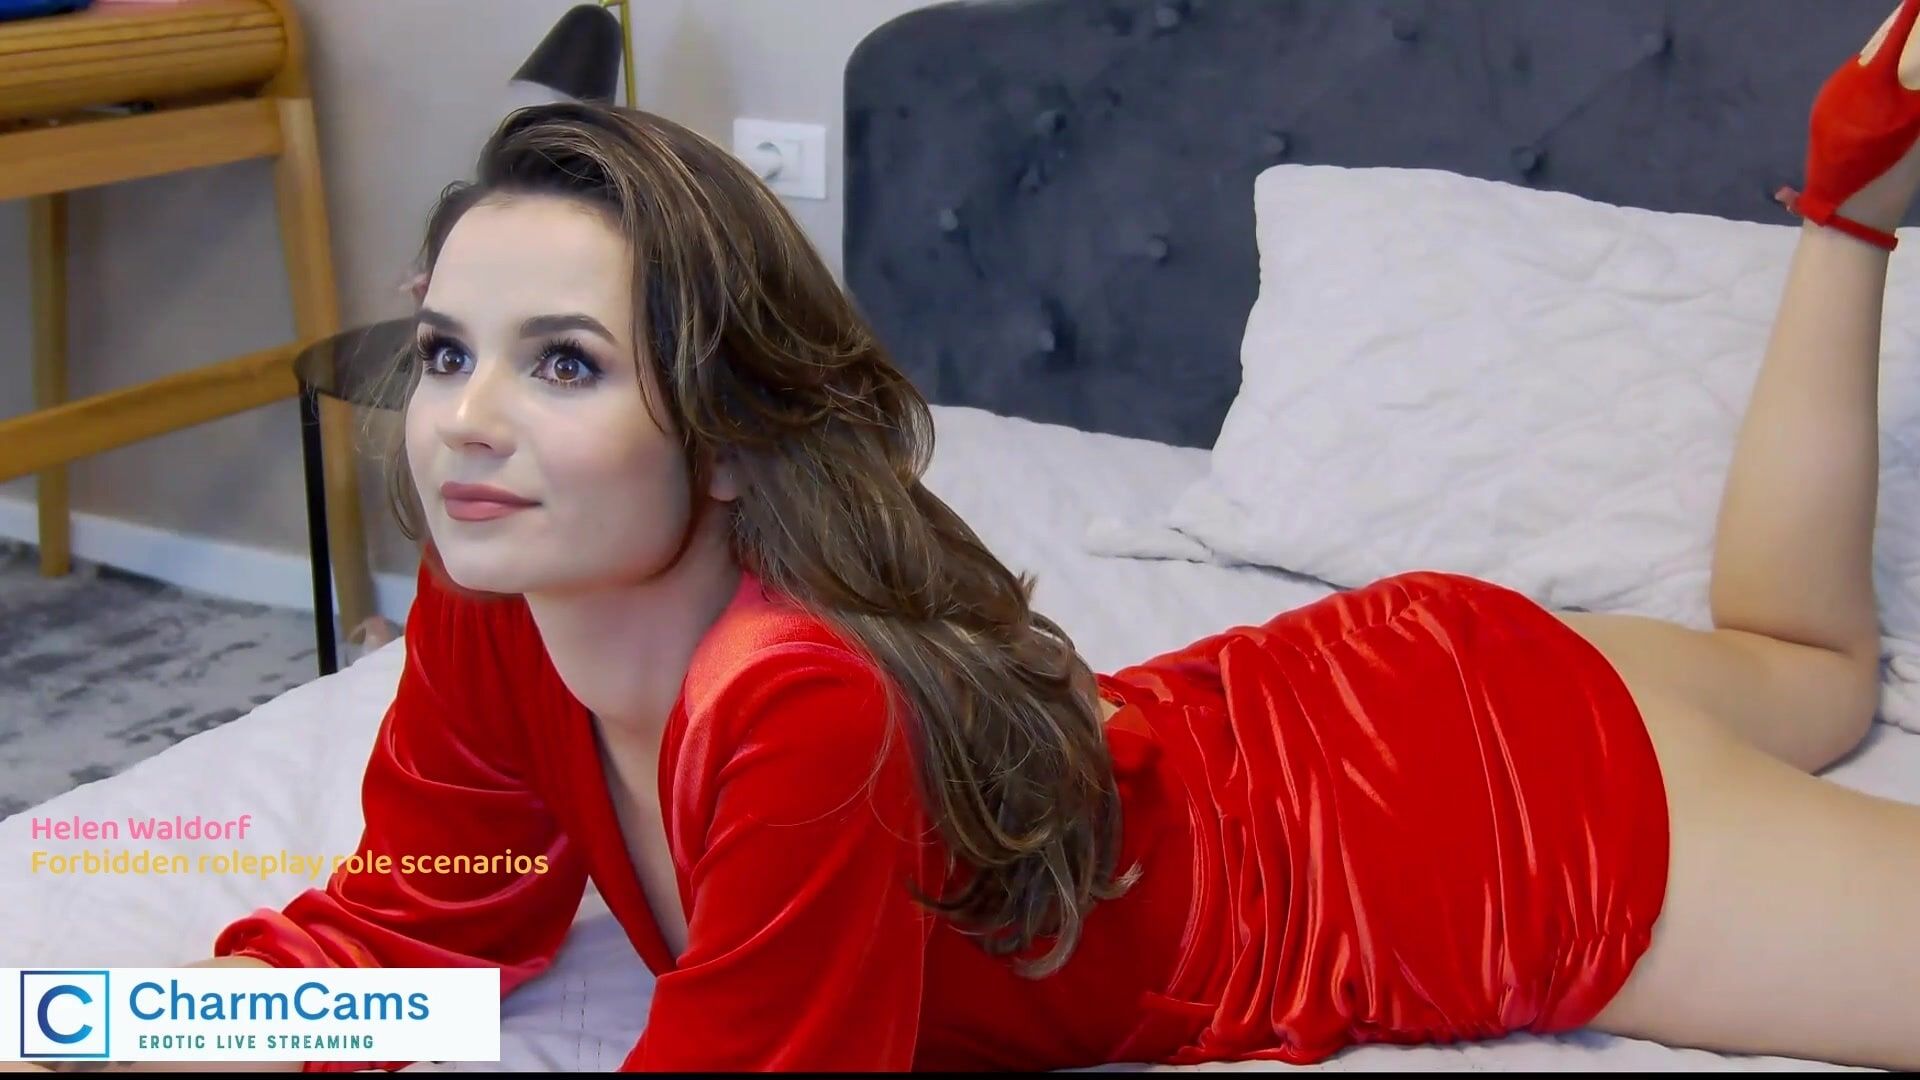 In bed with my red dress. #19